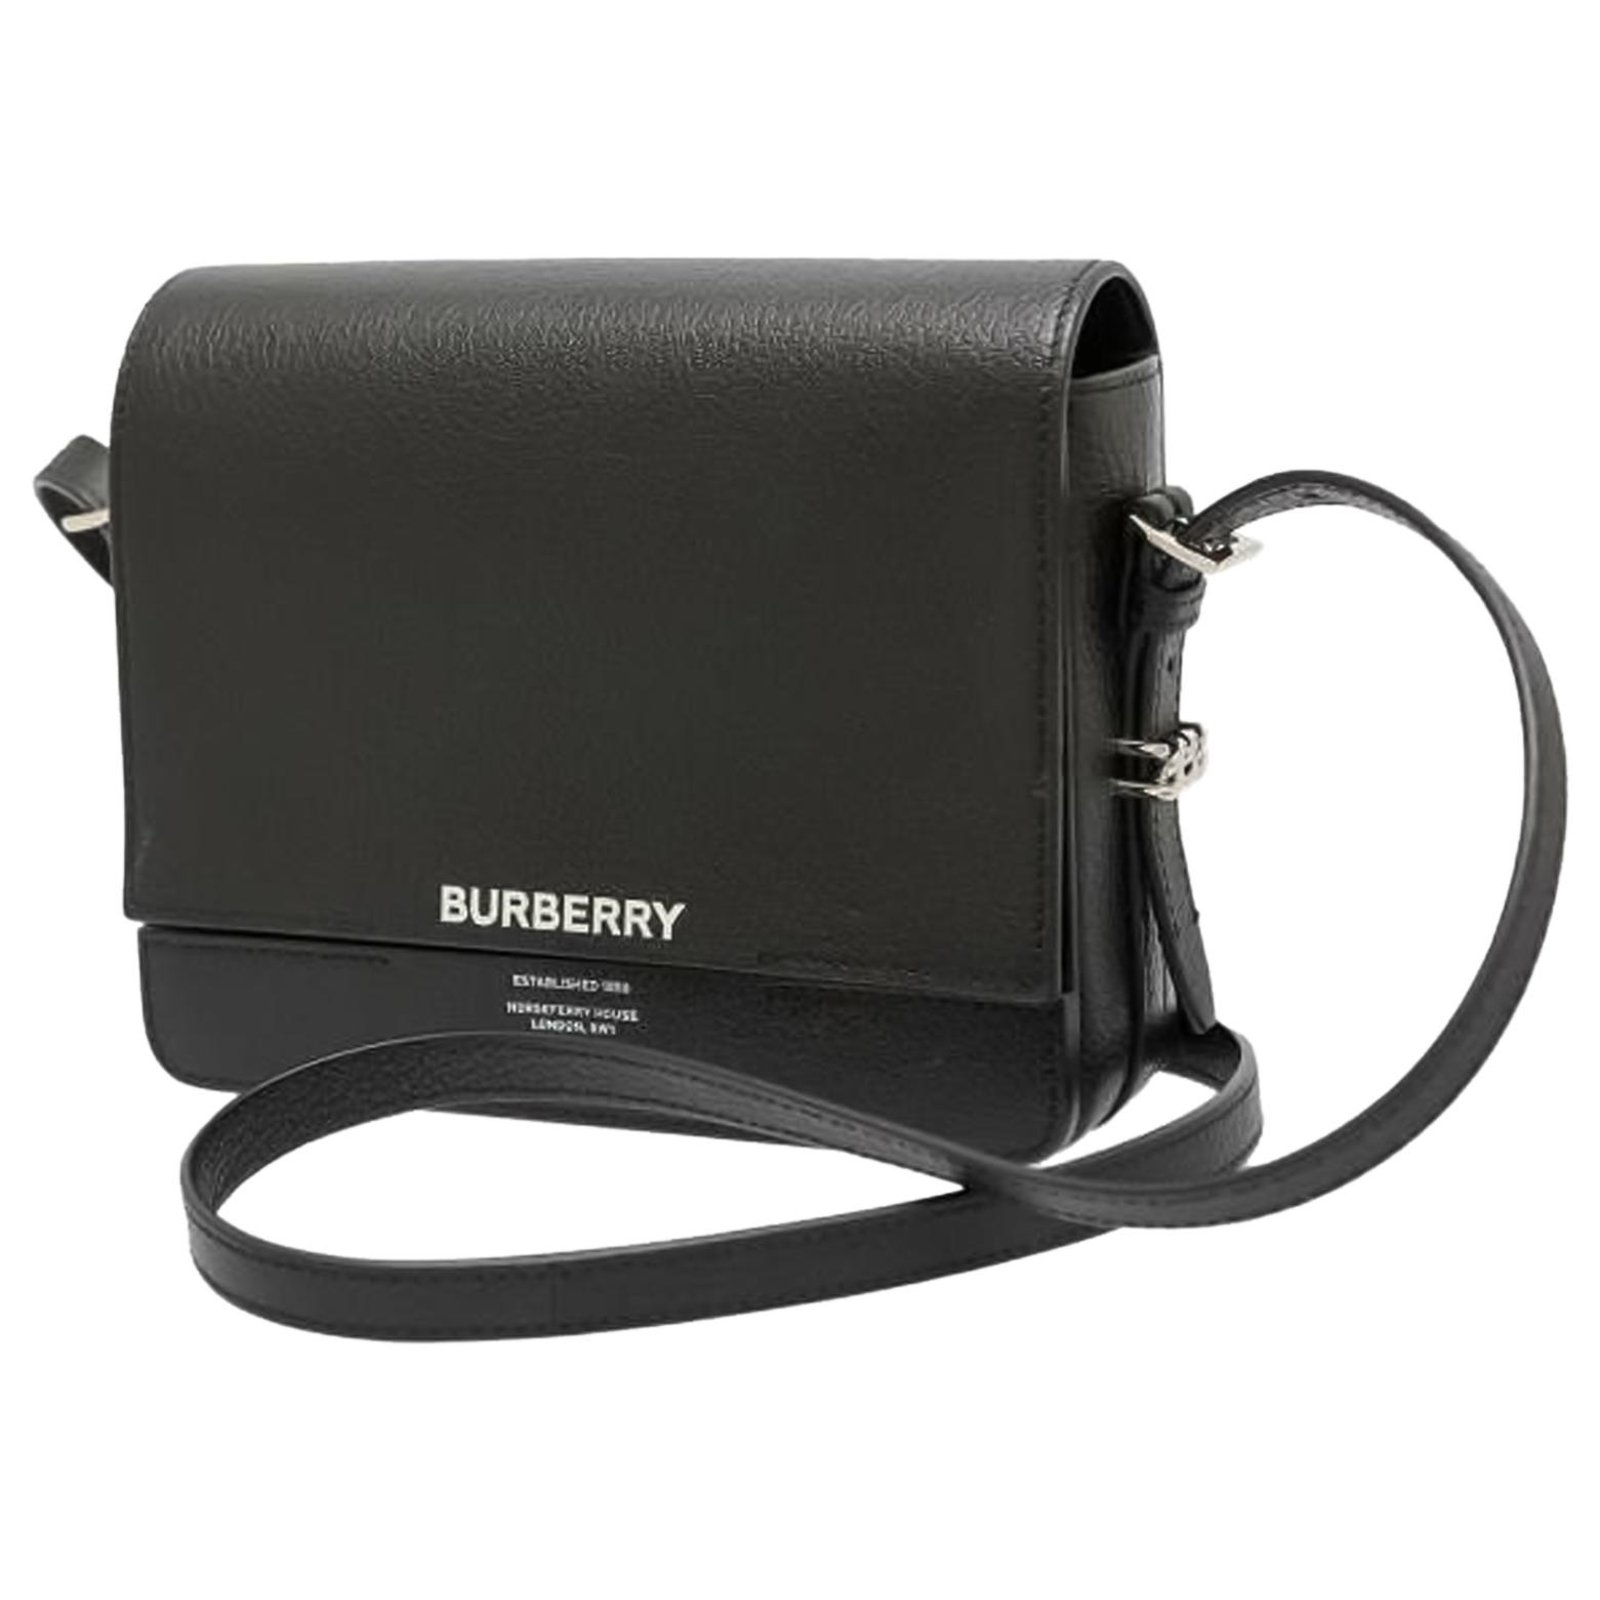 Burberry Bags Purses  Buy Burberry Bags Purses online in India